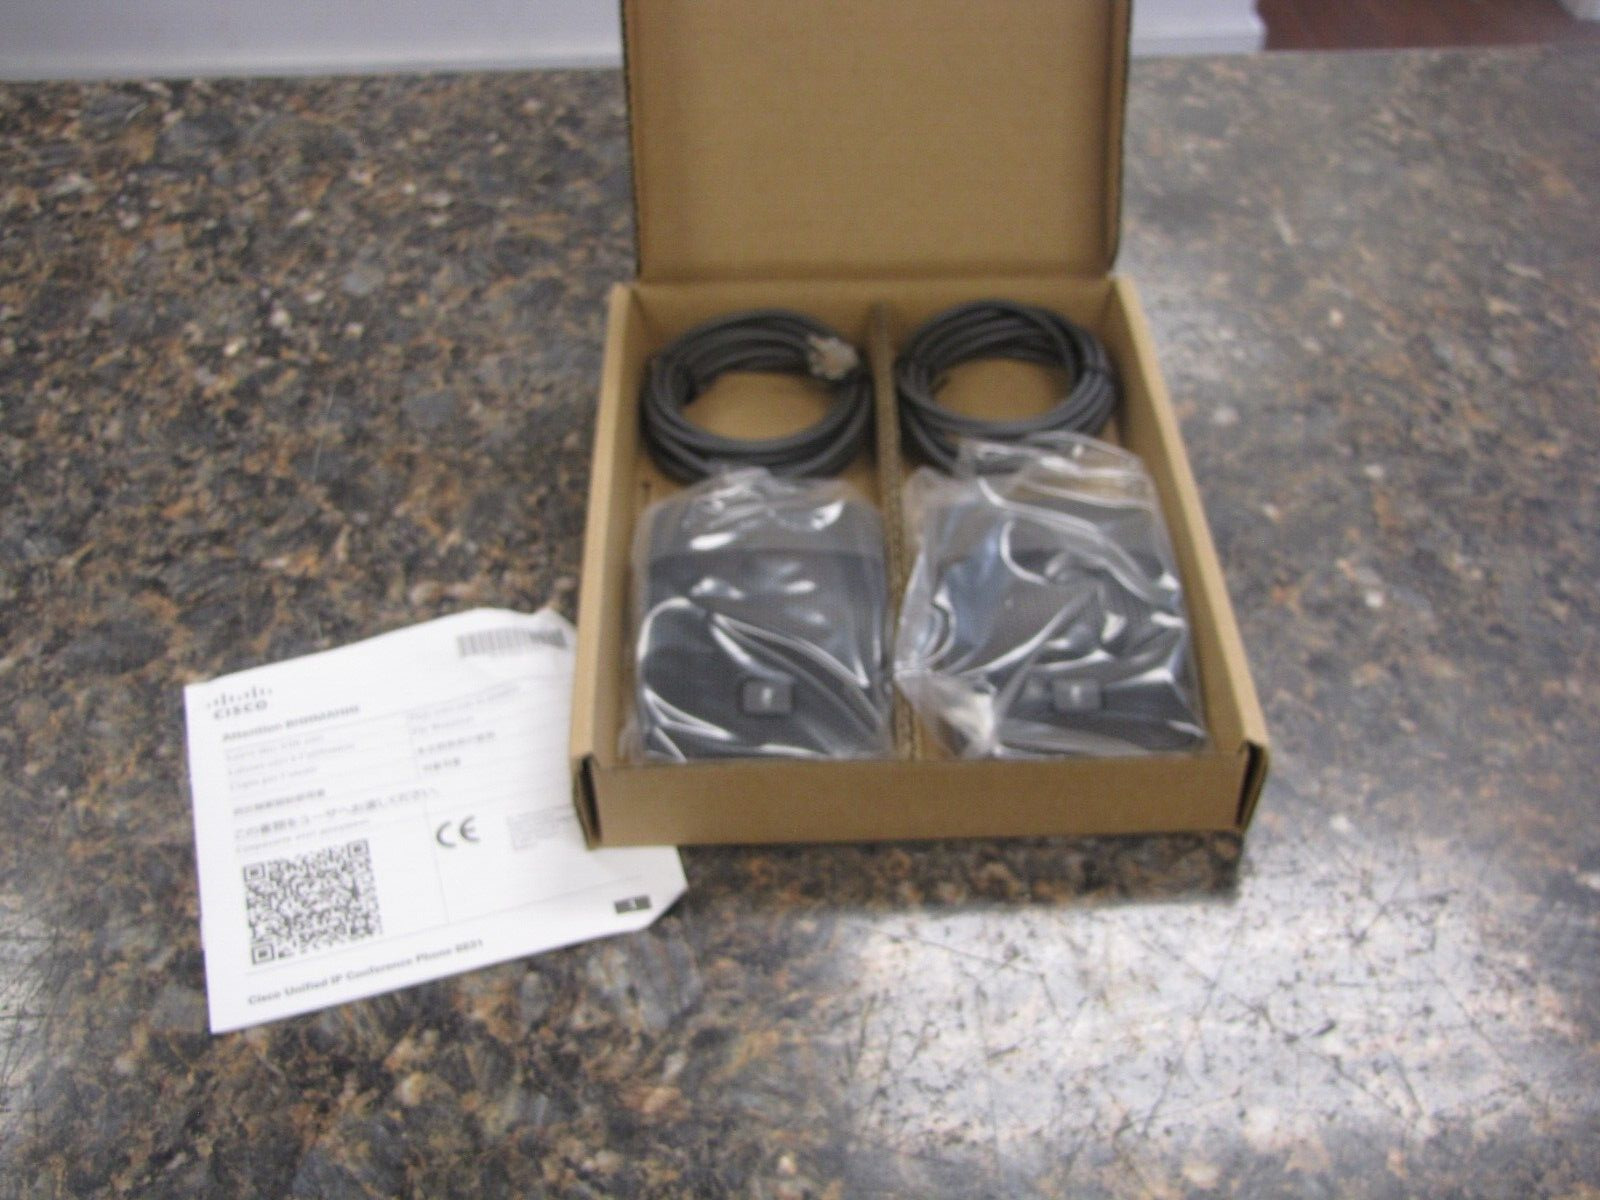 Cisco CP-MIC-WIRED-S Wired Microphone Kit 74-11134-01 for CP-8831 Phone - New